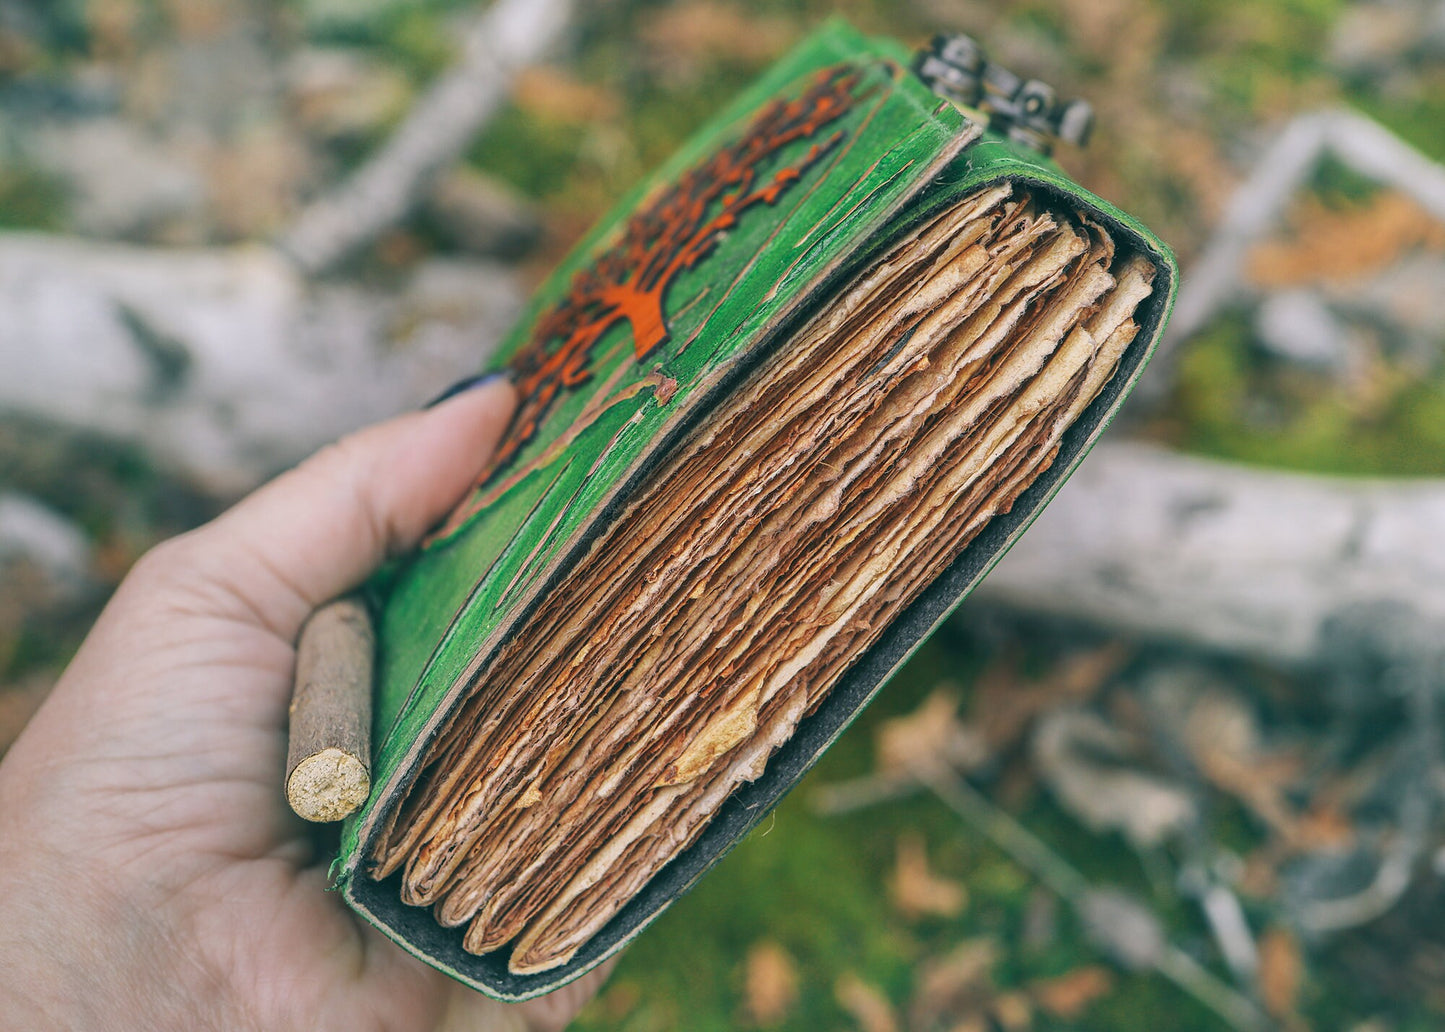 Grimoire - Tree of Life with Vintage Paper & Wooden Pencil